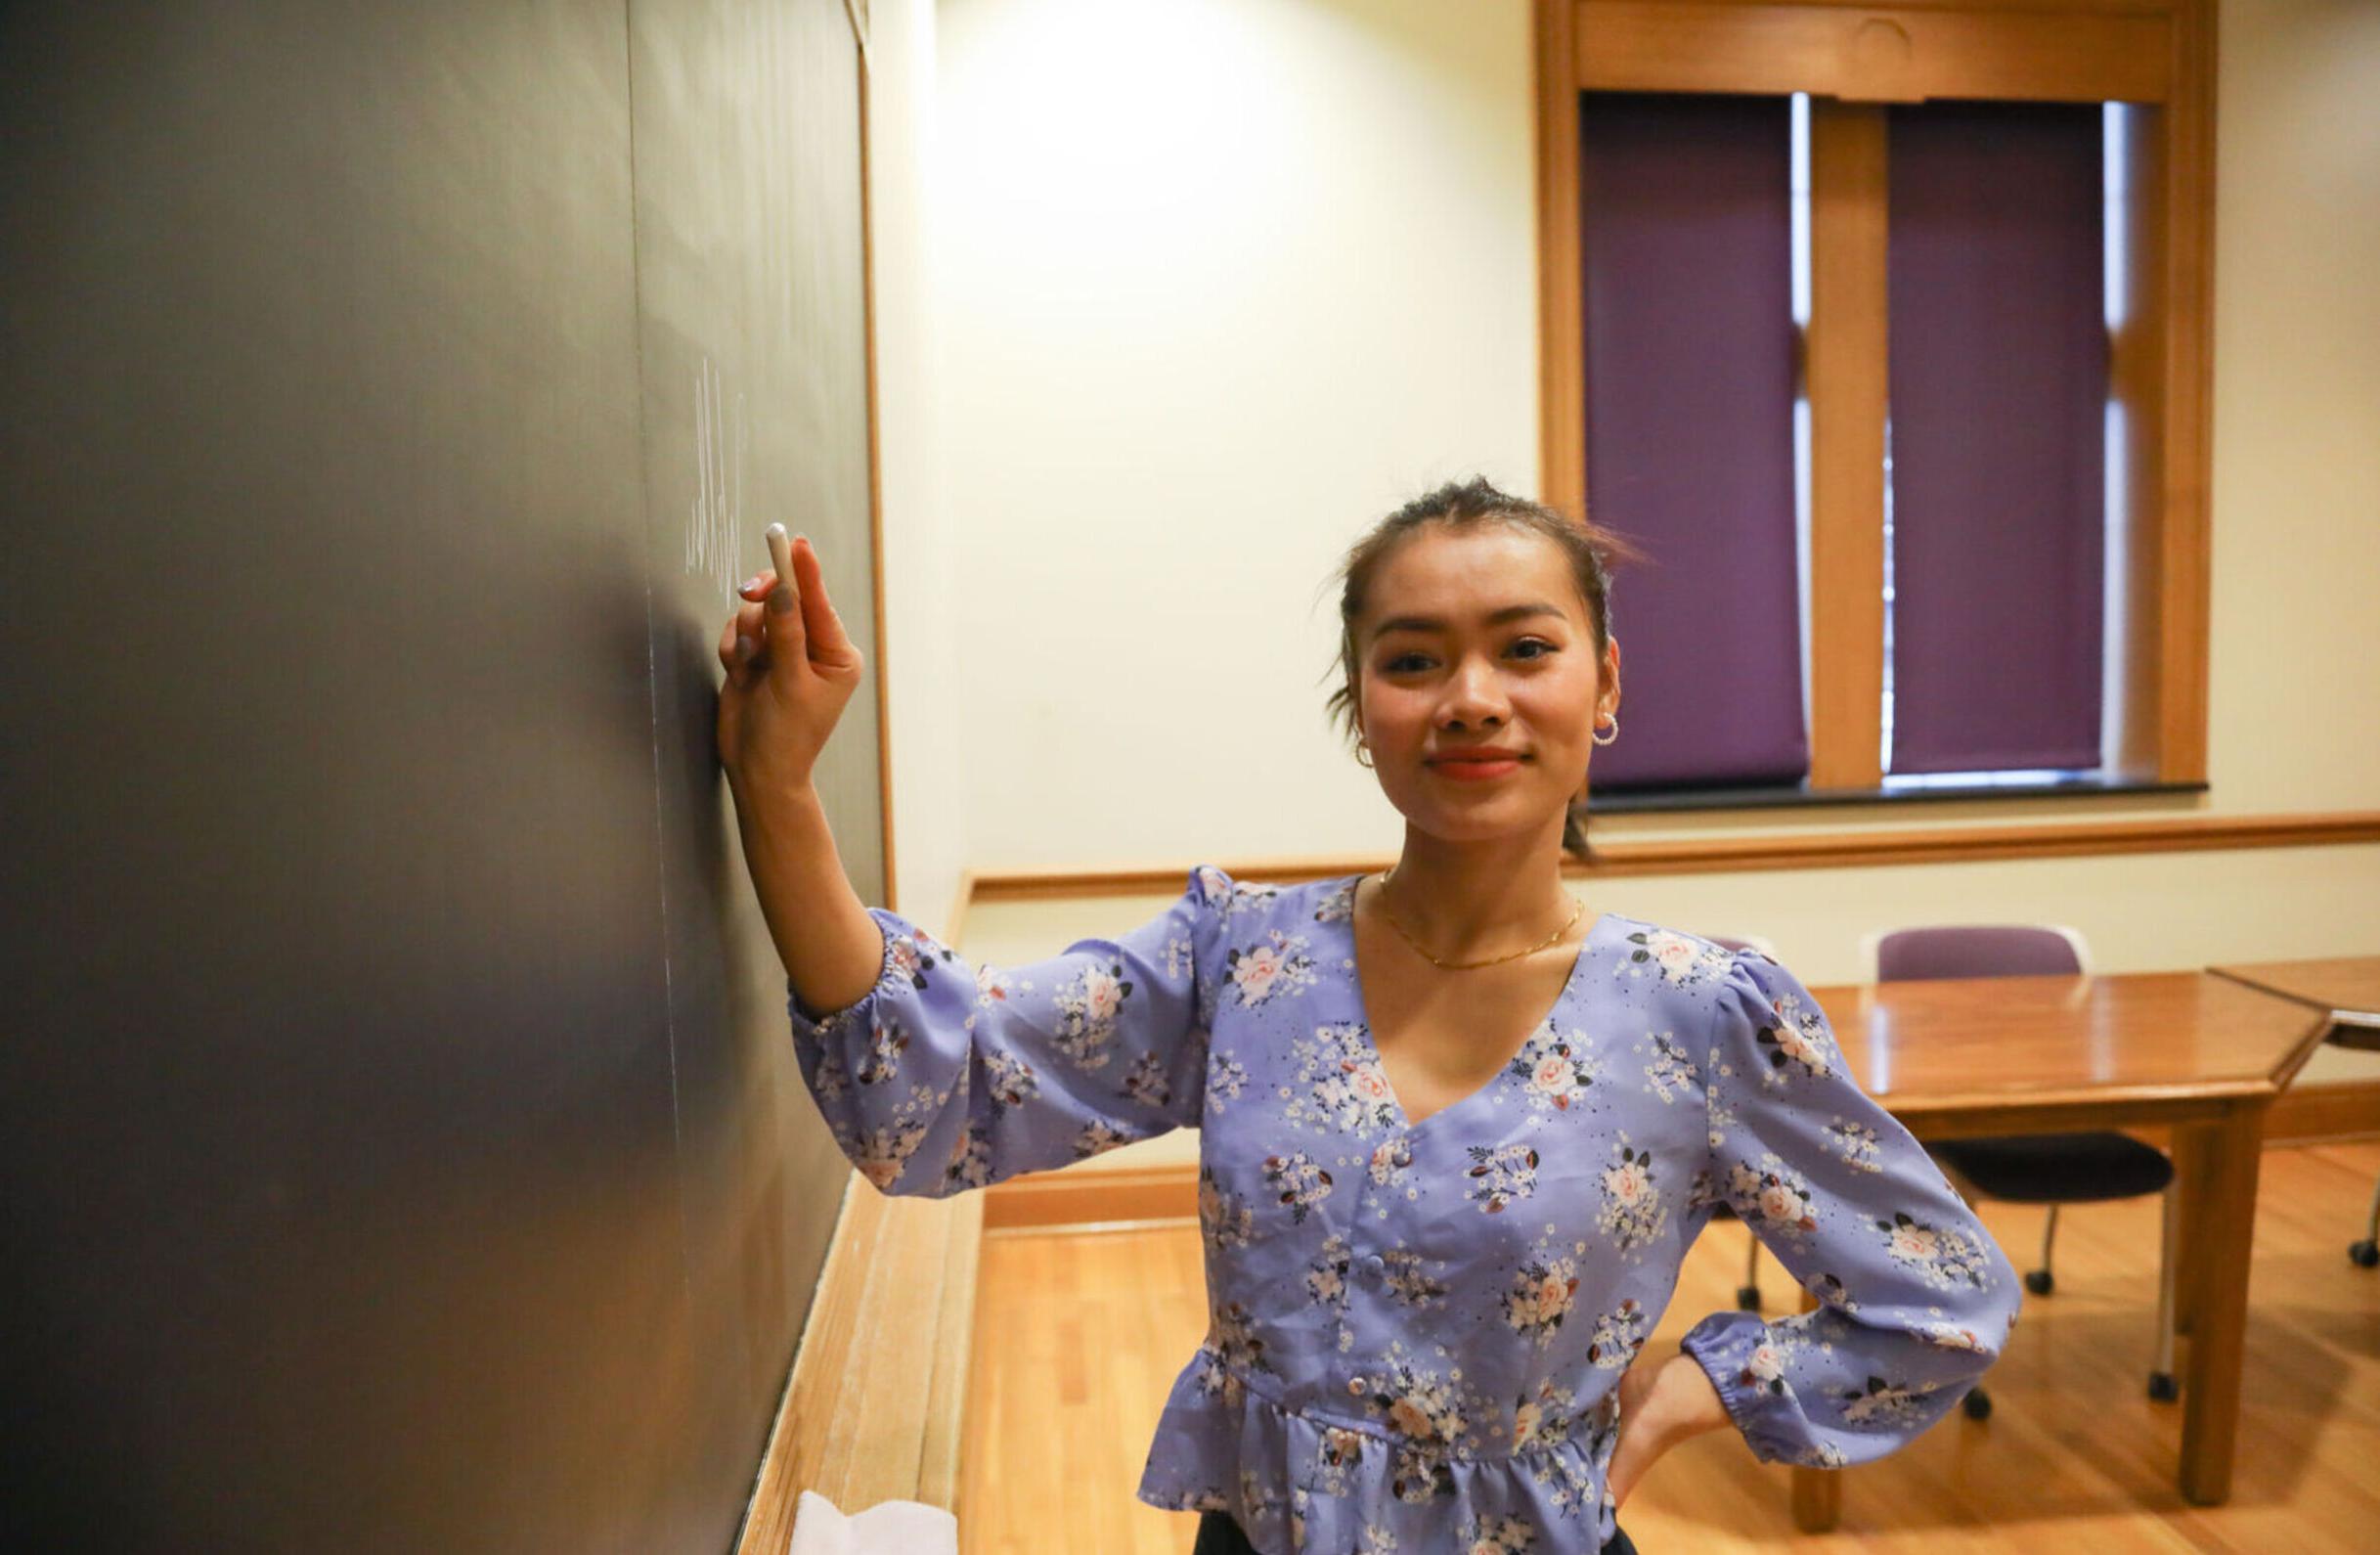 An international student poses as she's writing on a chalkboard